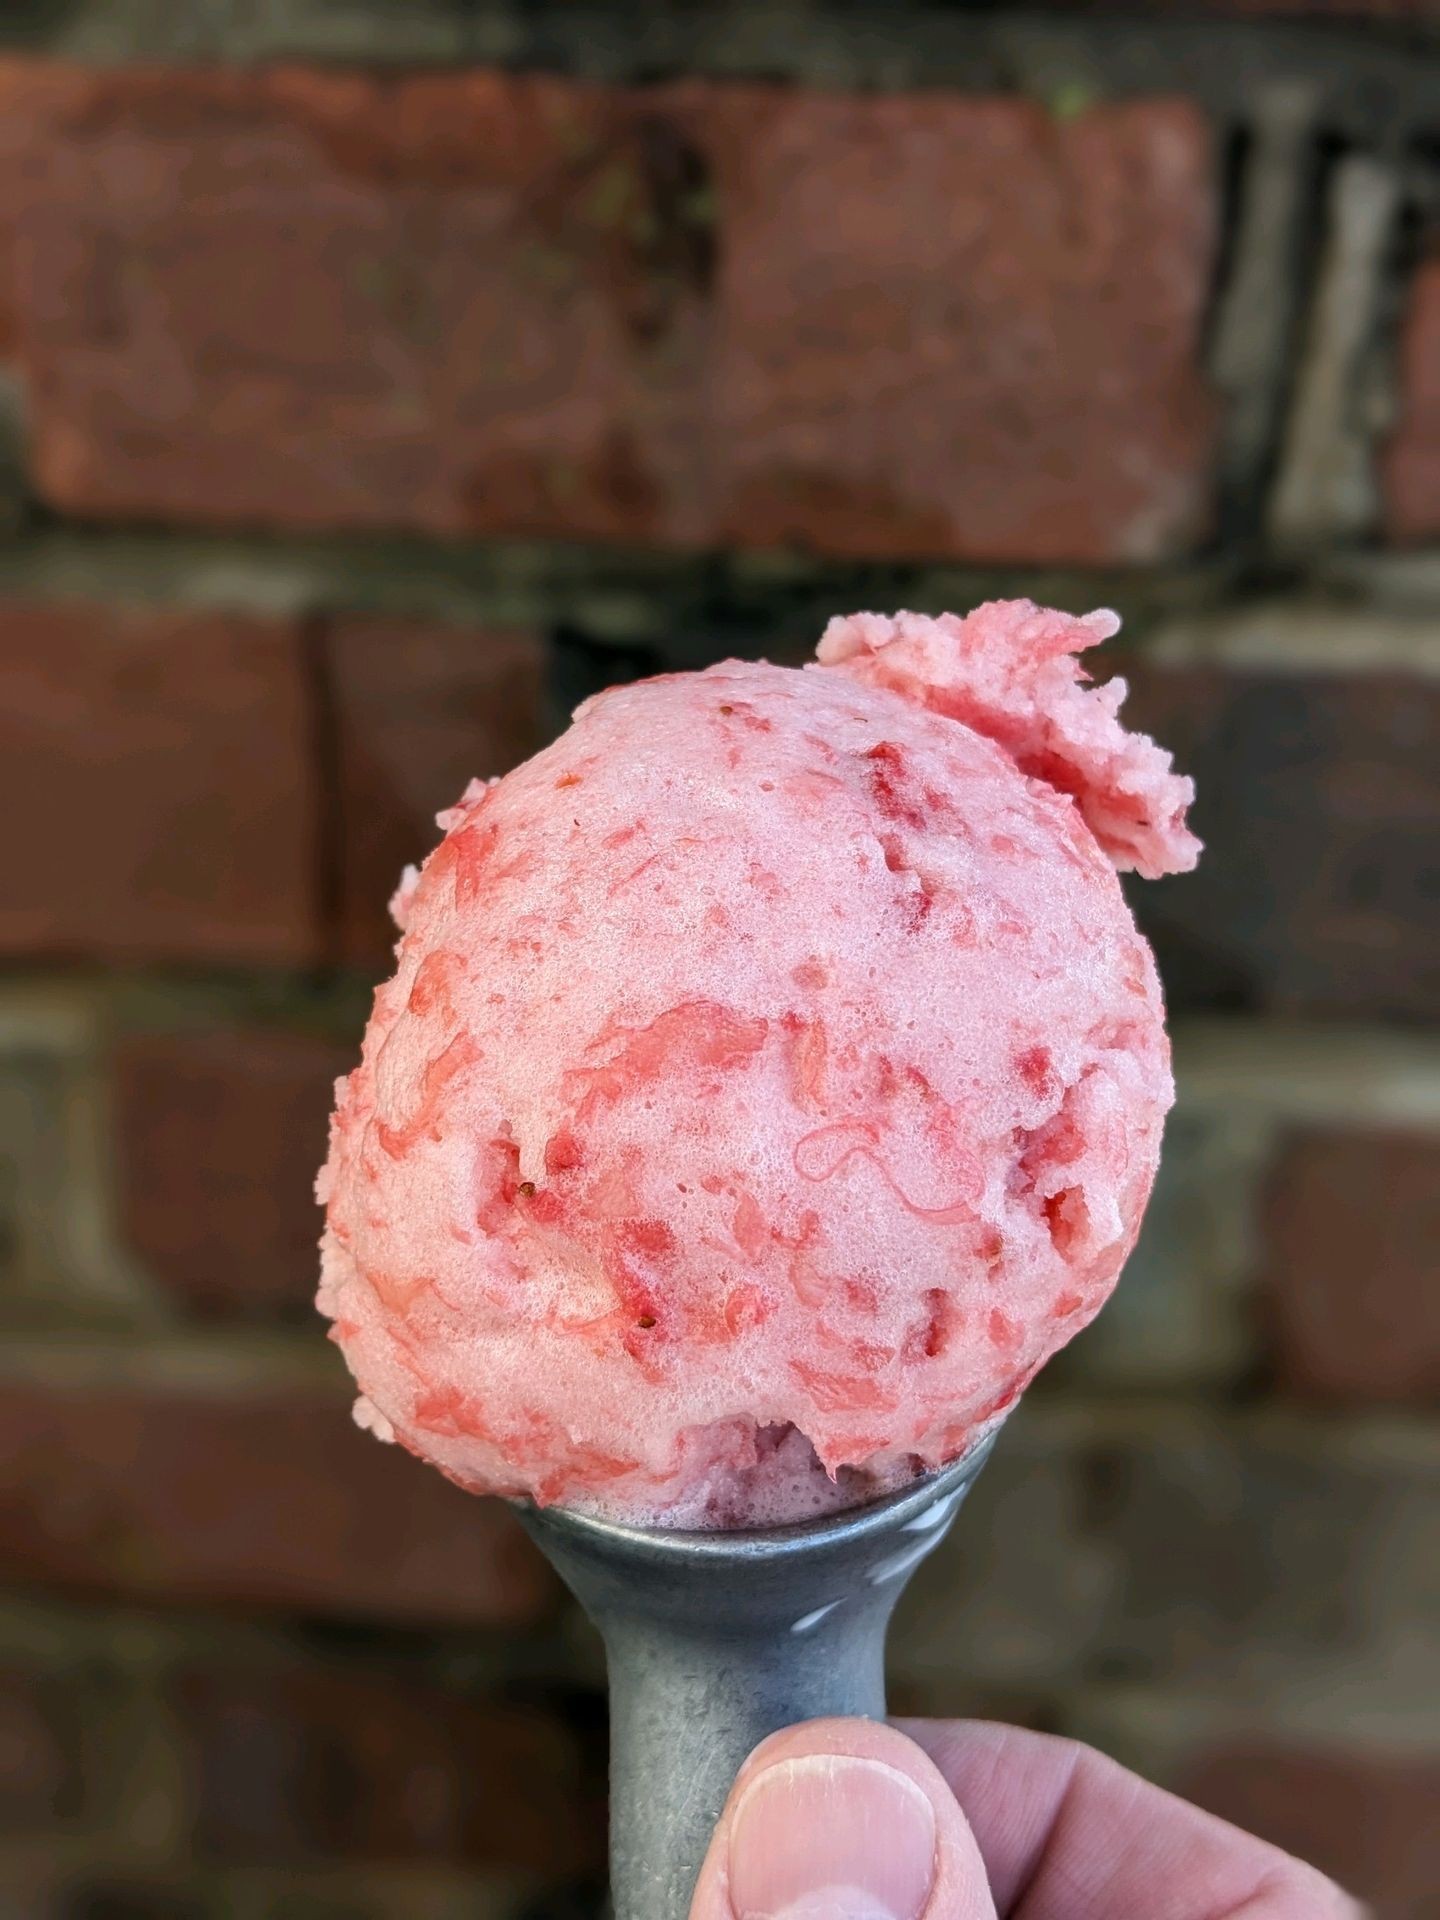 Strawberry pineapple sorbet. Crushed strawberry and pineapple mixed together to make a pinkish red sorbet.